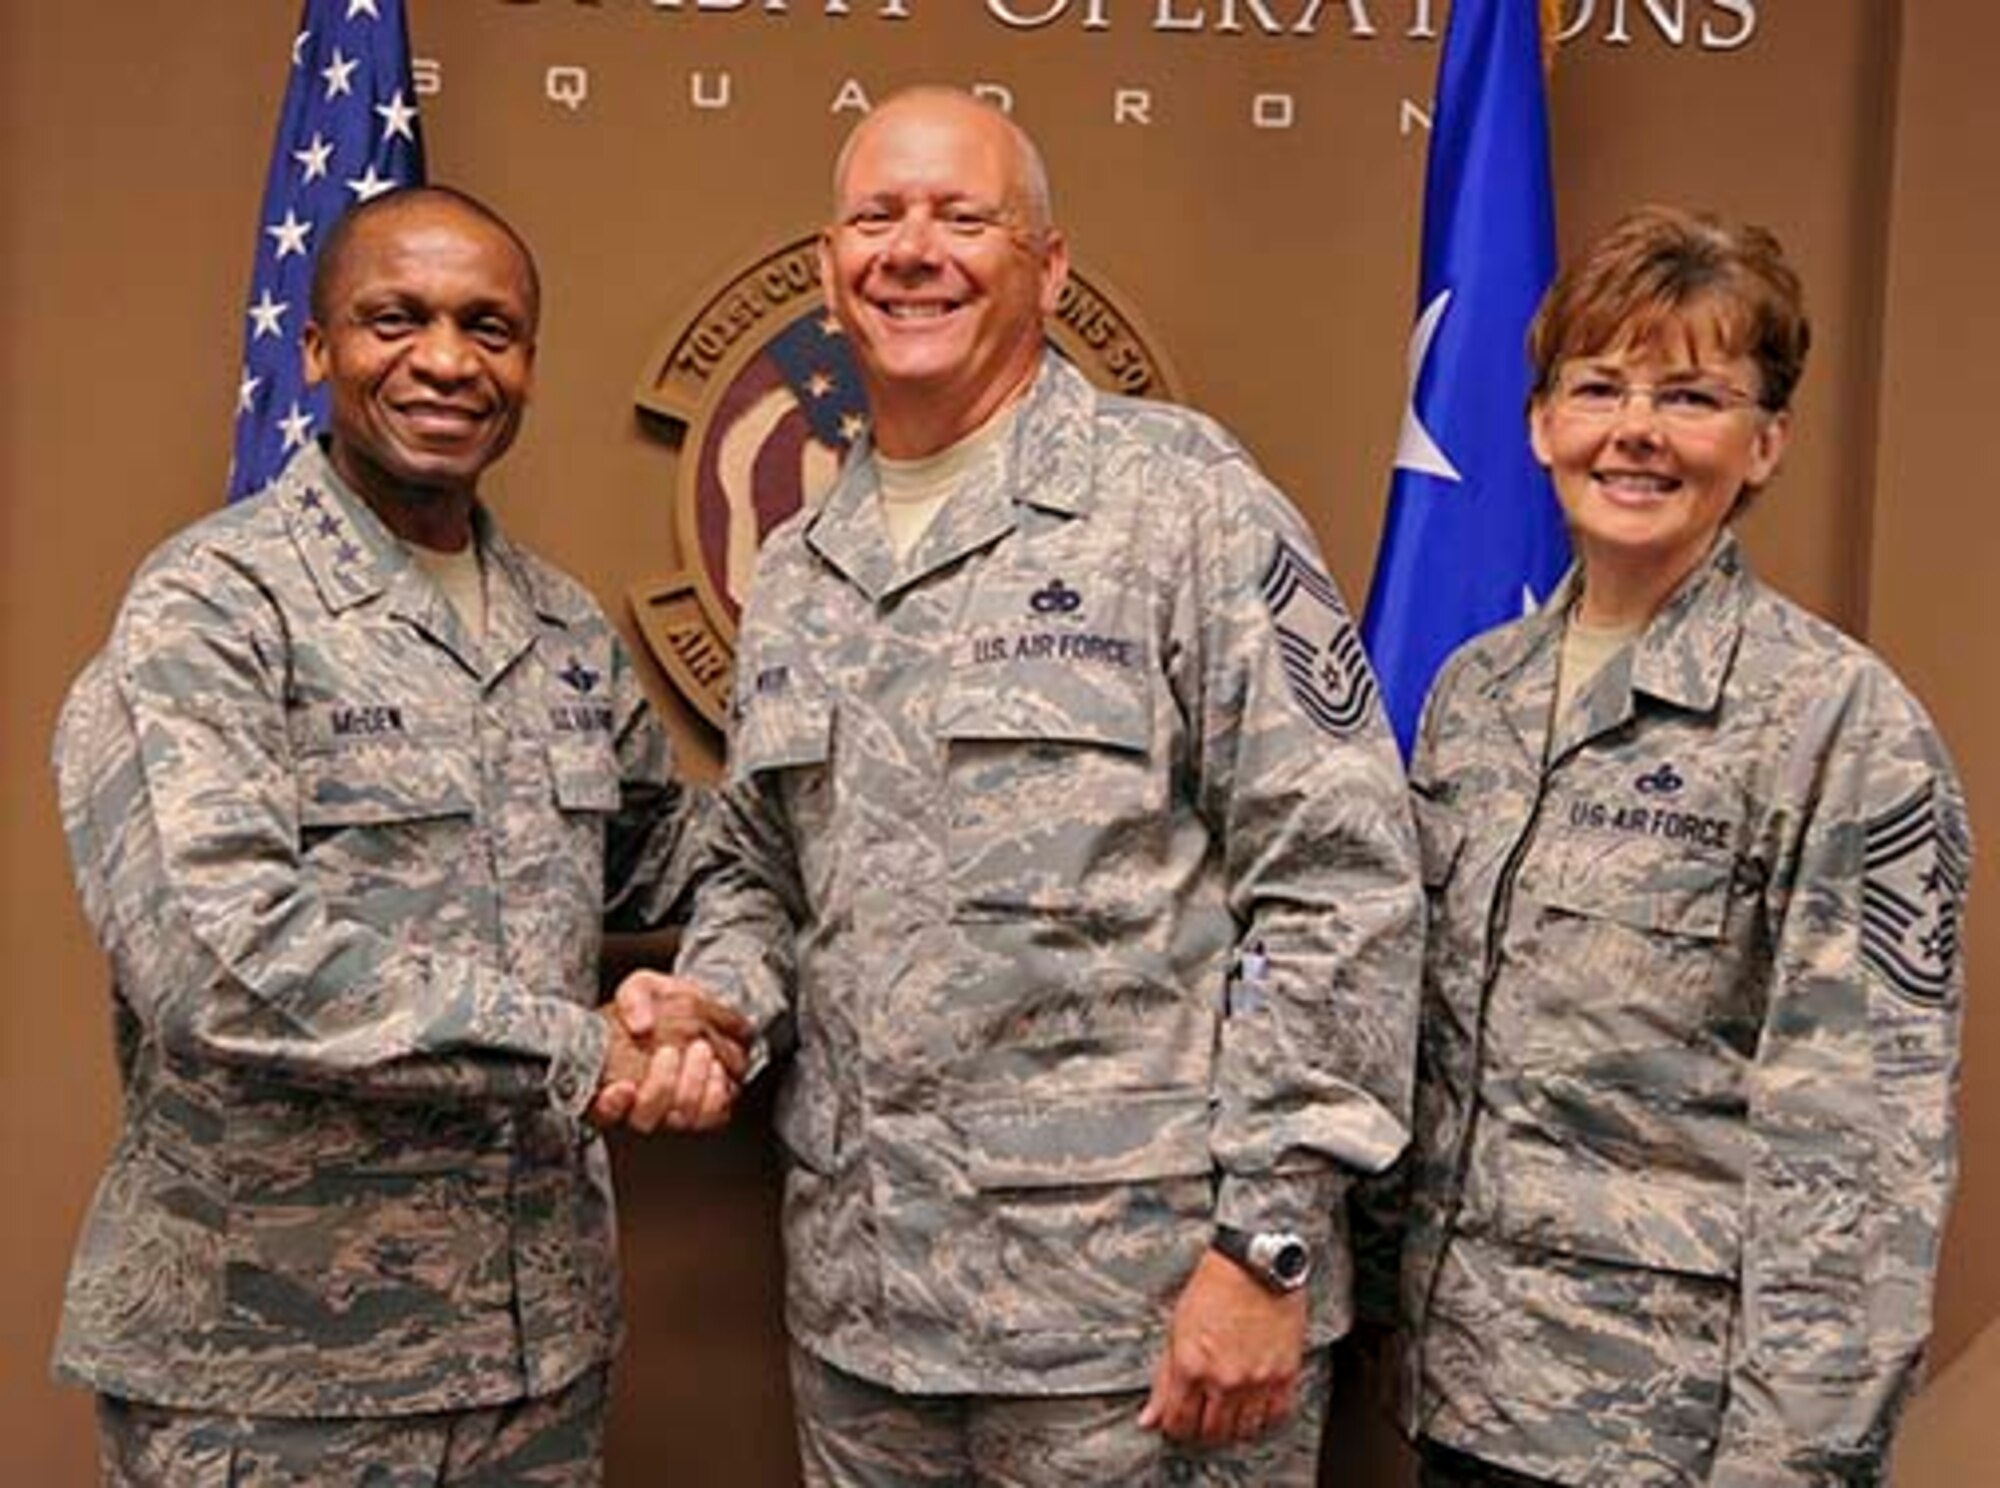 Lt. Gen. Darren McDew, commander, 18th Air Force and Chief Master Sgt. Vicki
Gamble, command chief, 18th Air Force, congratulate Chief Master Sgt. James
Wood, 56th Aerial Port Squadron, March Air Reserve Base, for Wood's
participation in Superstorm Sandy relief efforts. McDew and Gamble visited
March ARB May 8-9 to meet with Airmen face-to-face, thank them for their
service and answer their questions. Wood worked relief efforts as an Airman
and as an employee of Southern California Edison, proving that "Citizen
Airman" is more than just words. (U.S. Air Force photo/Staff Sgt. Jacquelyn Estrada)
